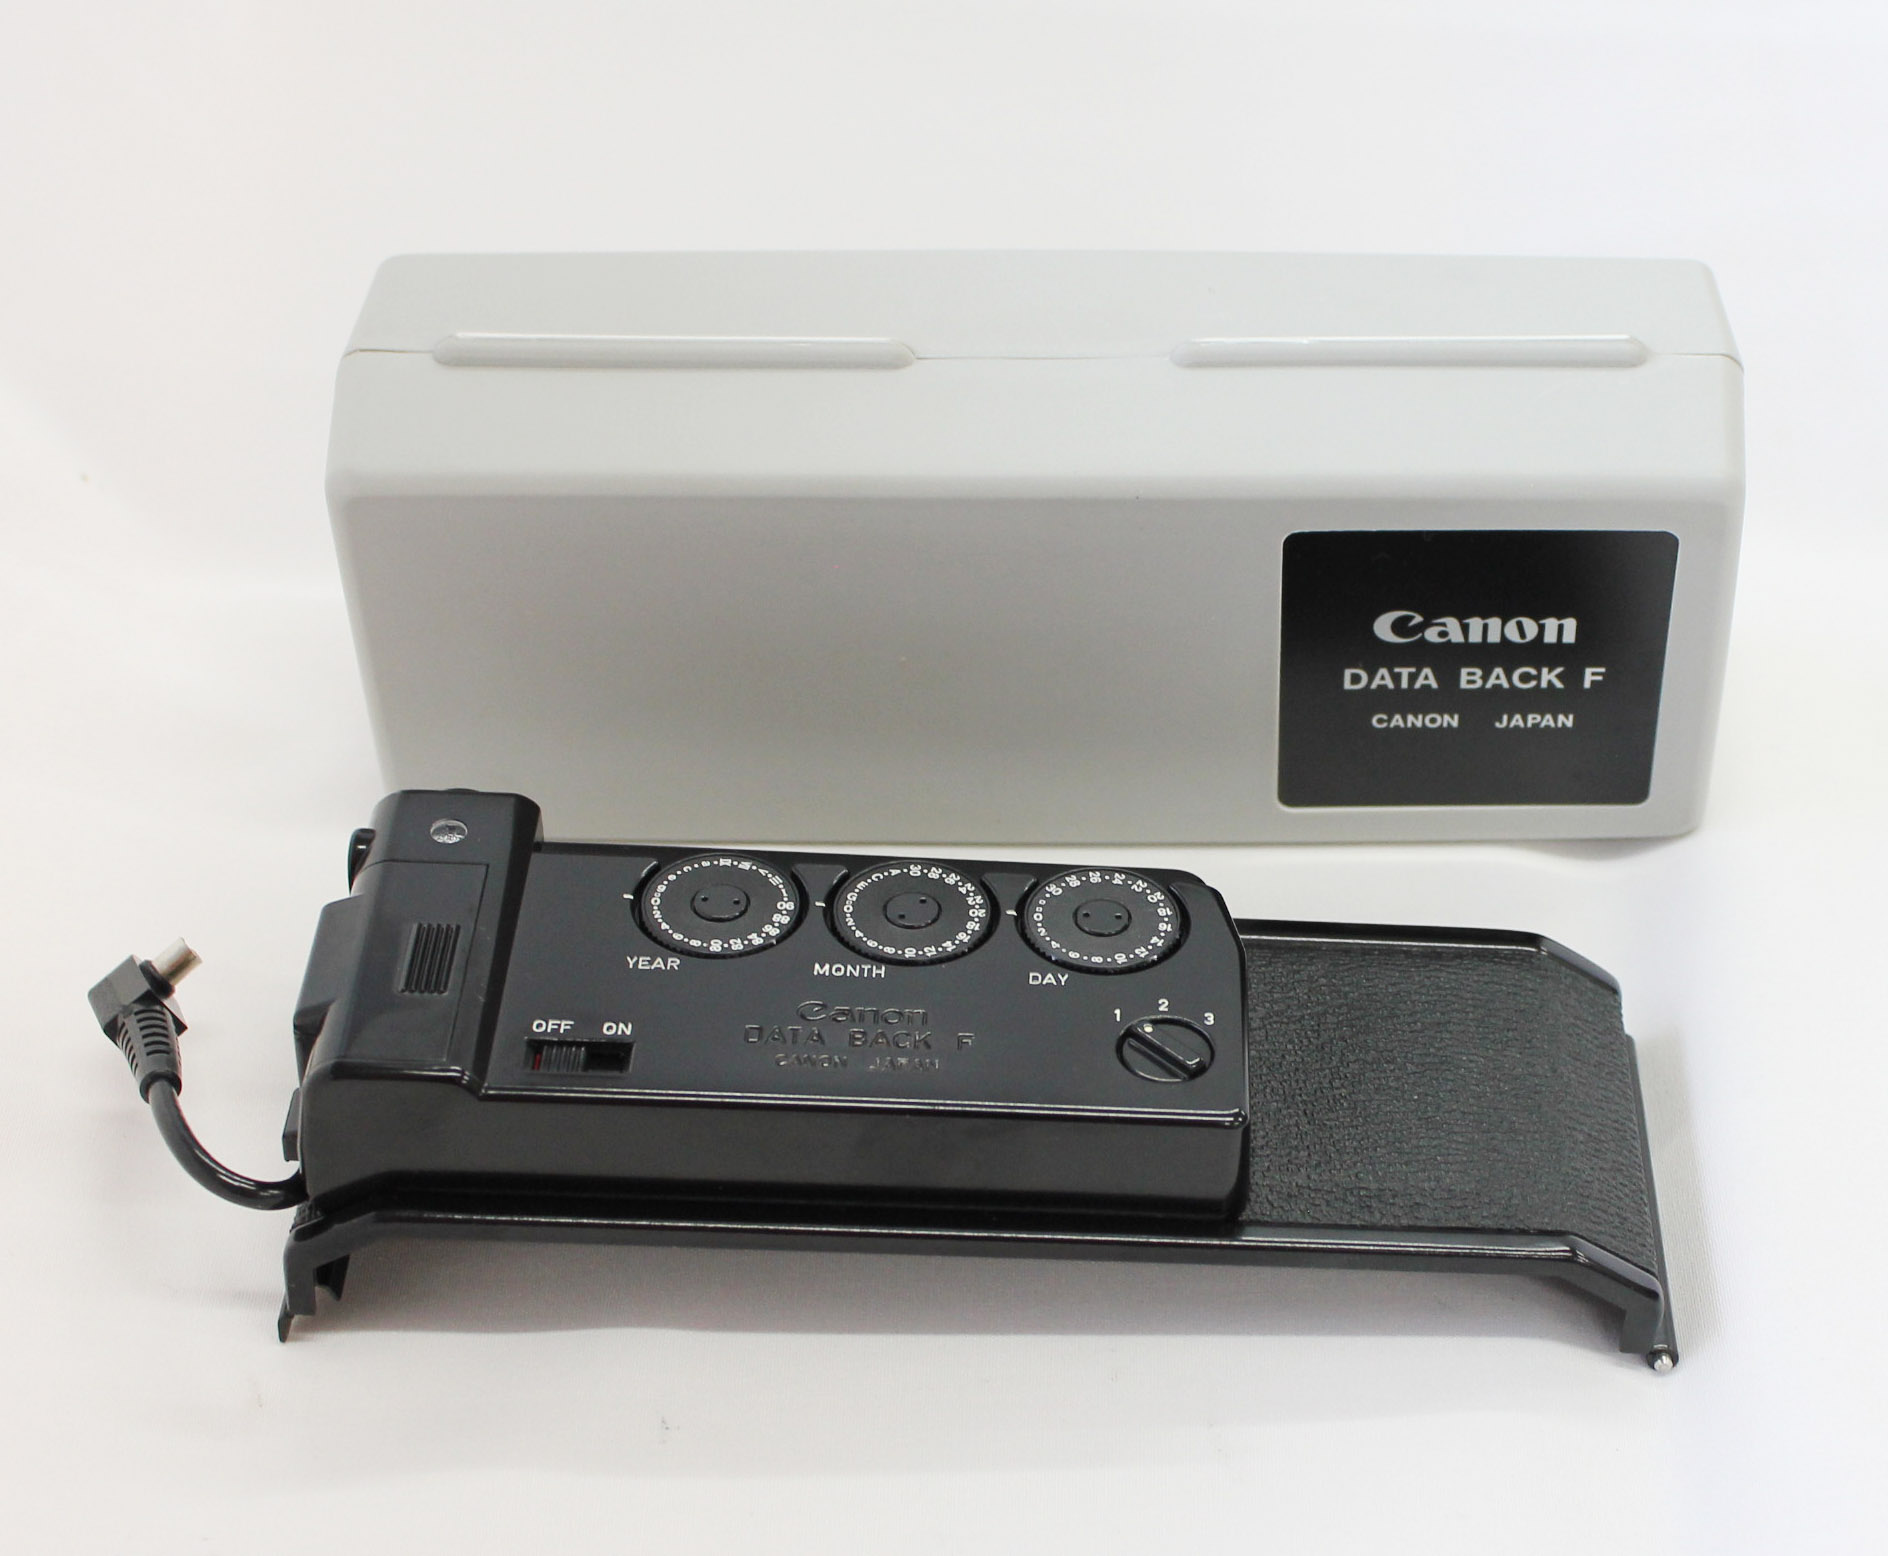 [Near Mint] Canon Data Back F in Case for Canon F-1 from Japan